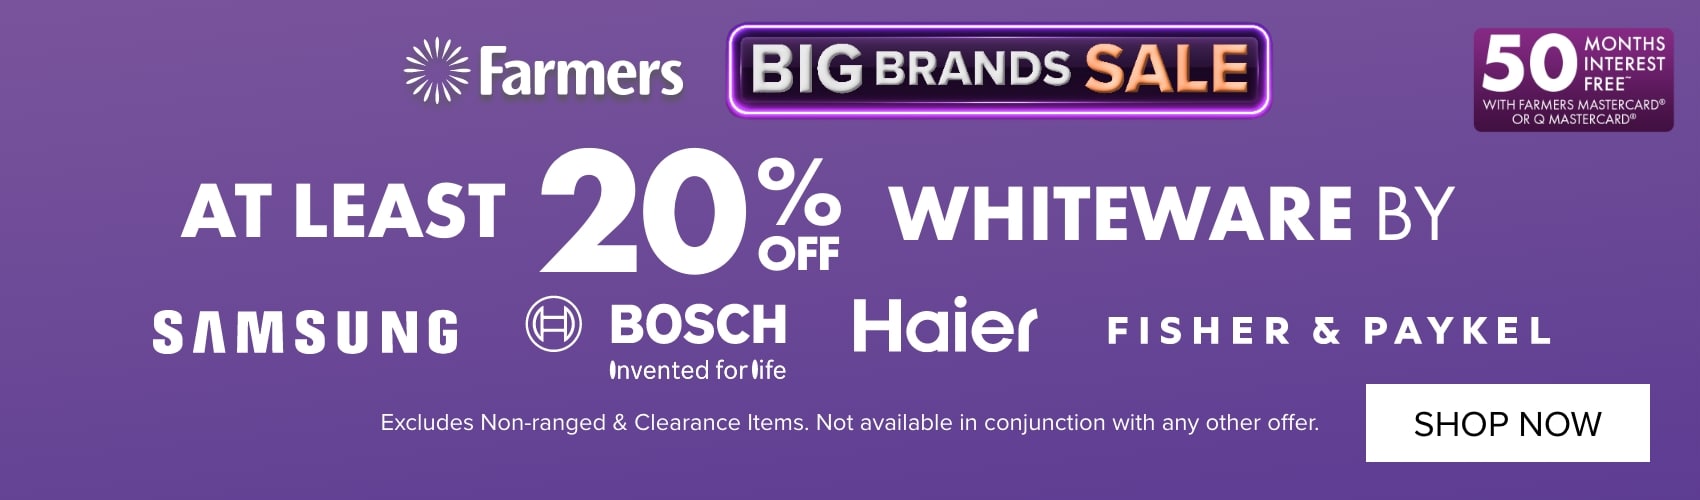 AT LEAST 20% OFF Whiteware by Fisher & Paykel, Haier, Samsung and Bosch